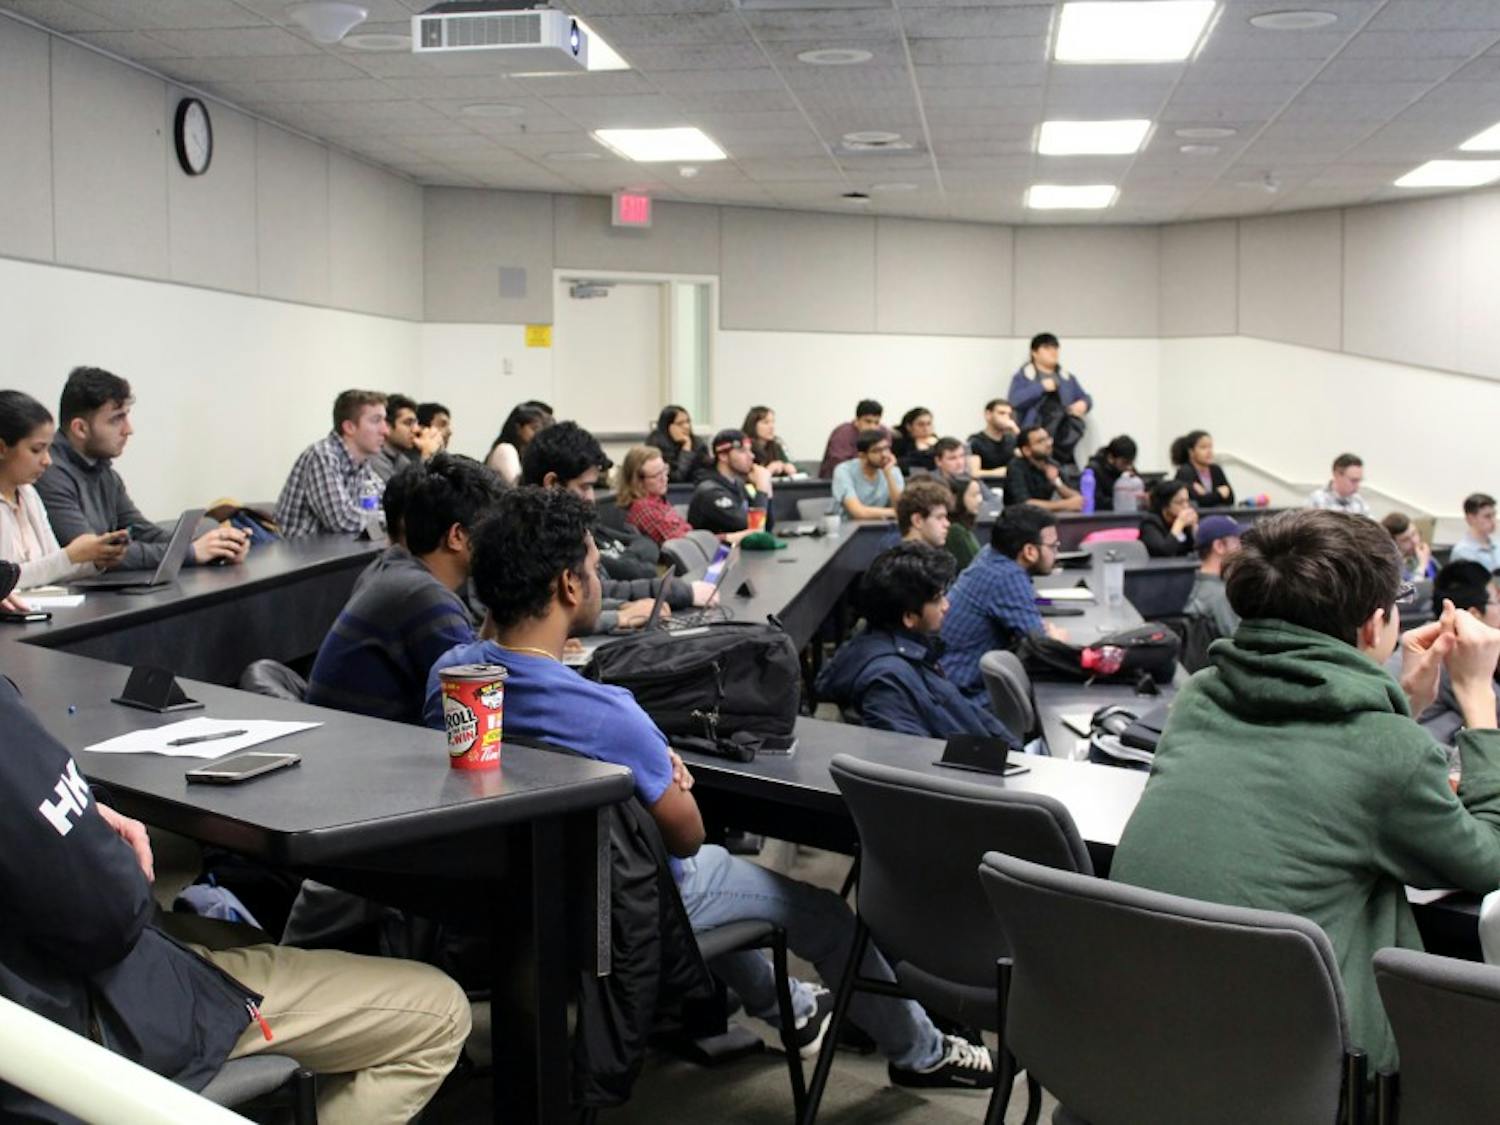 UB students forms new club on cryptocurrency and blockchain technology. Members discuss how cryptocurrency and blockchain technology looks to change the way the financial world runs.